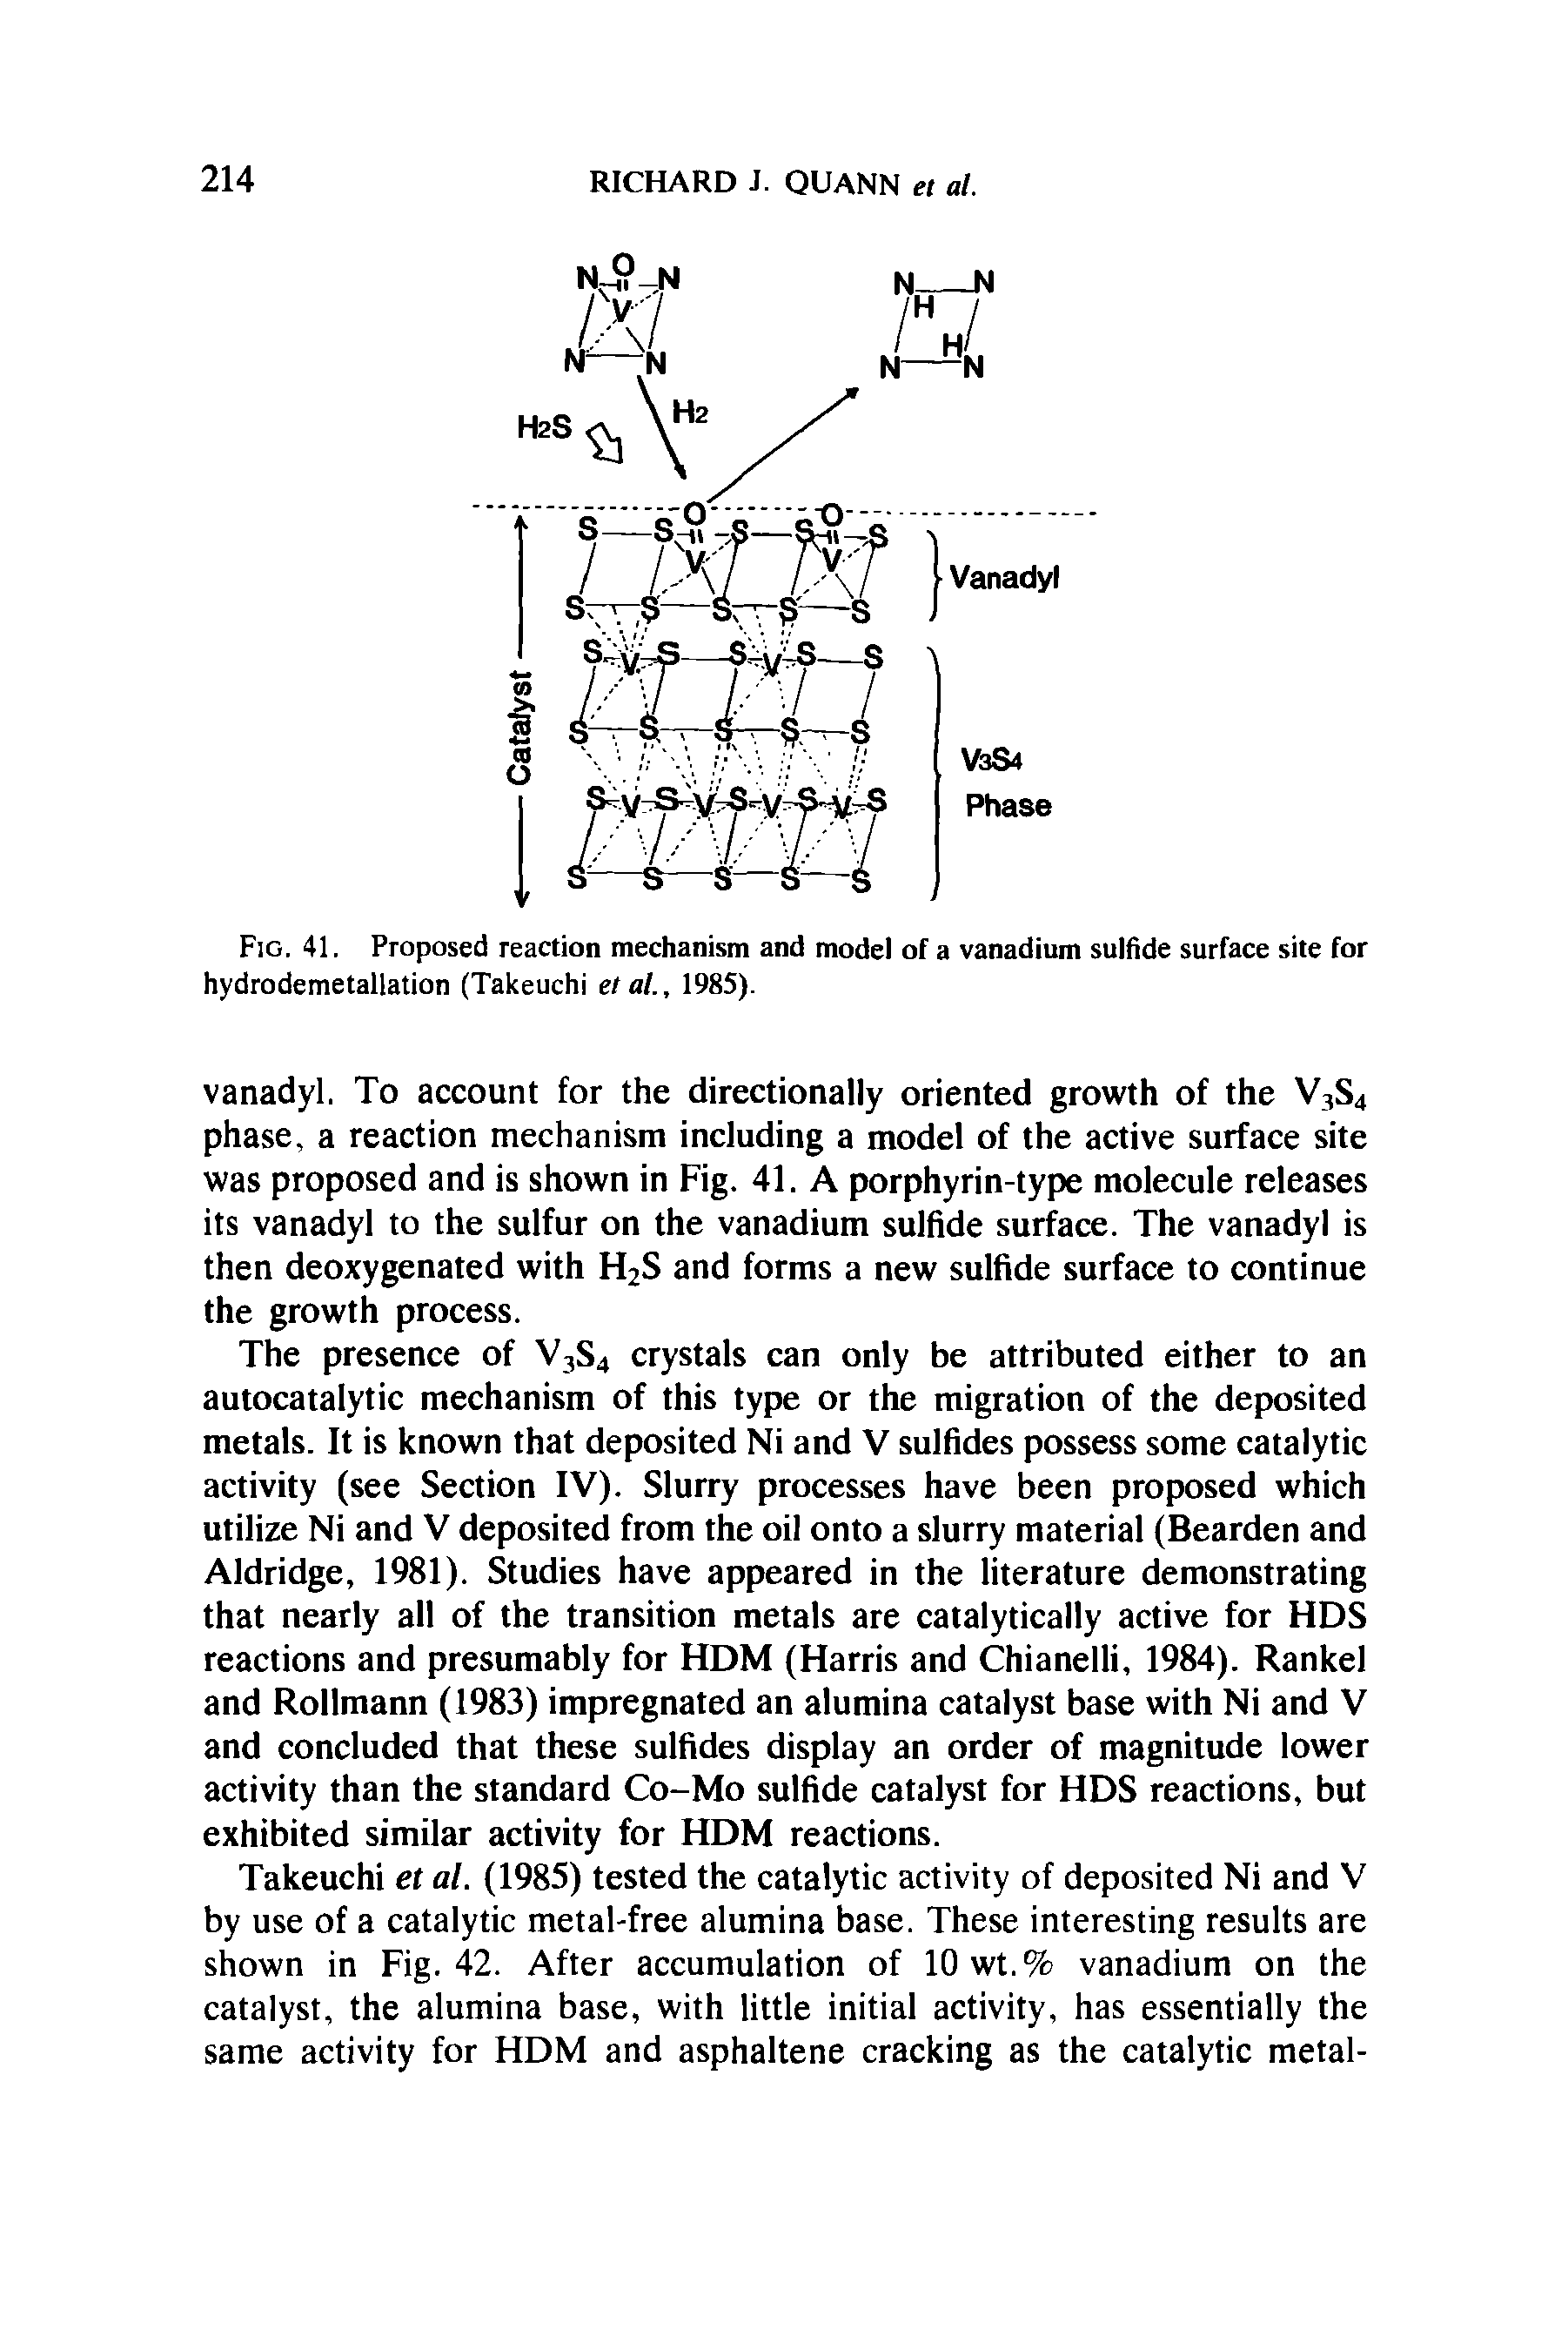 Fig. 41. Proposed reaction mechanism and model of a vanadium sulfide surface site for hydrodemetallation (Takeuchi et al., 1985).